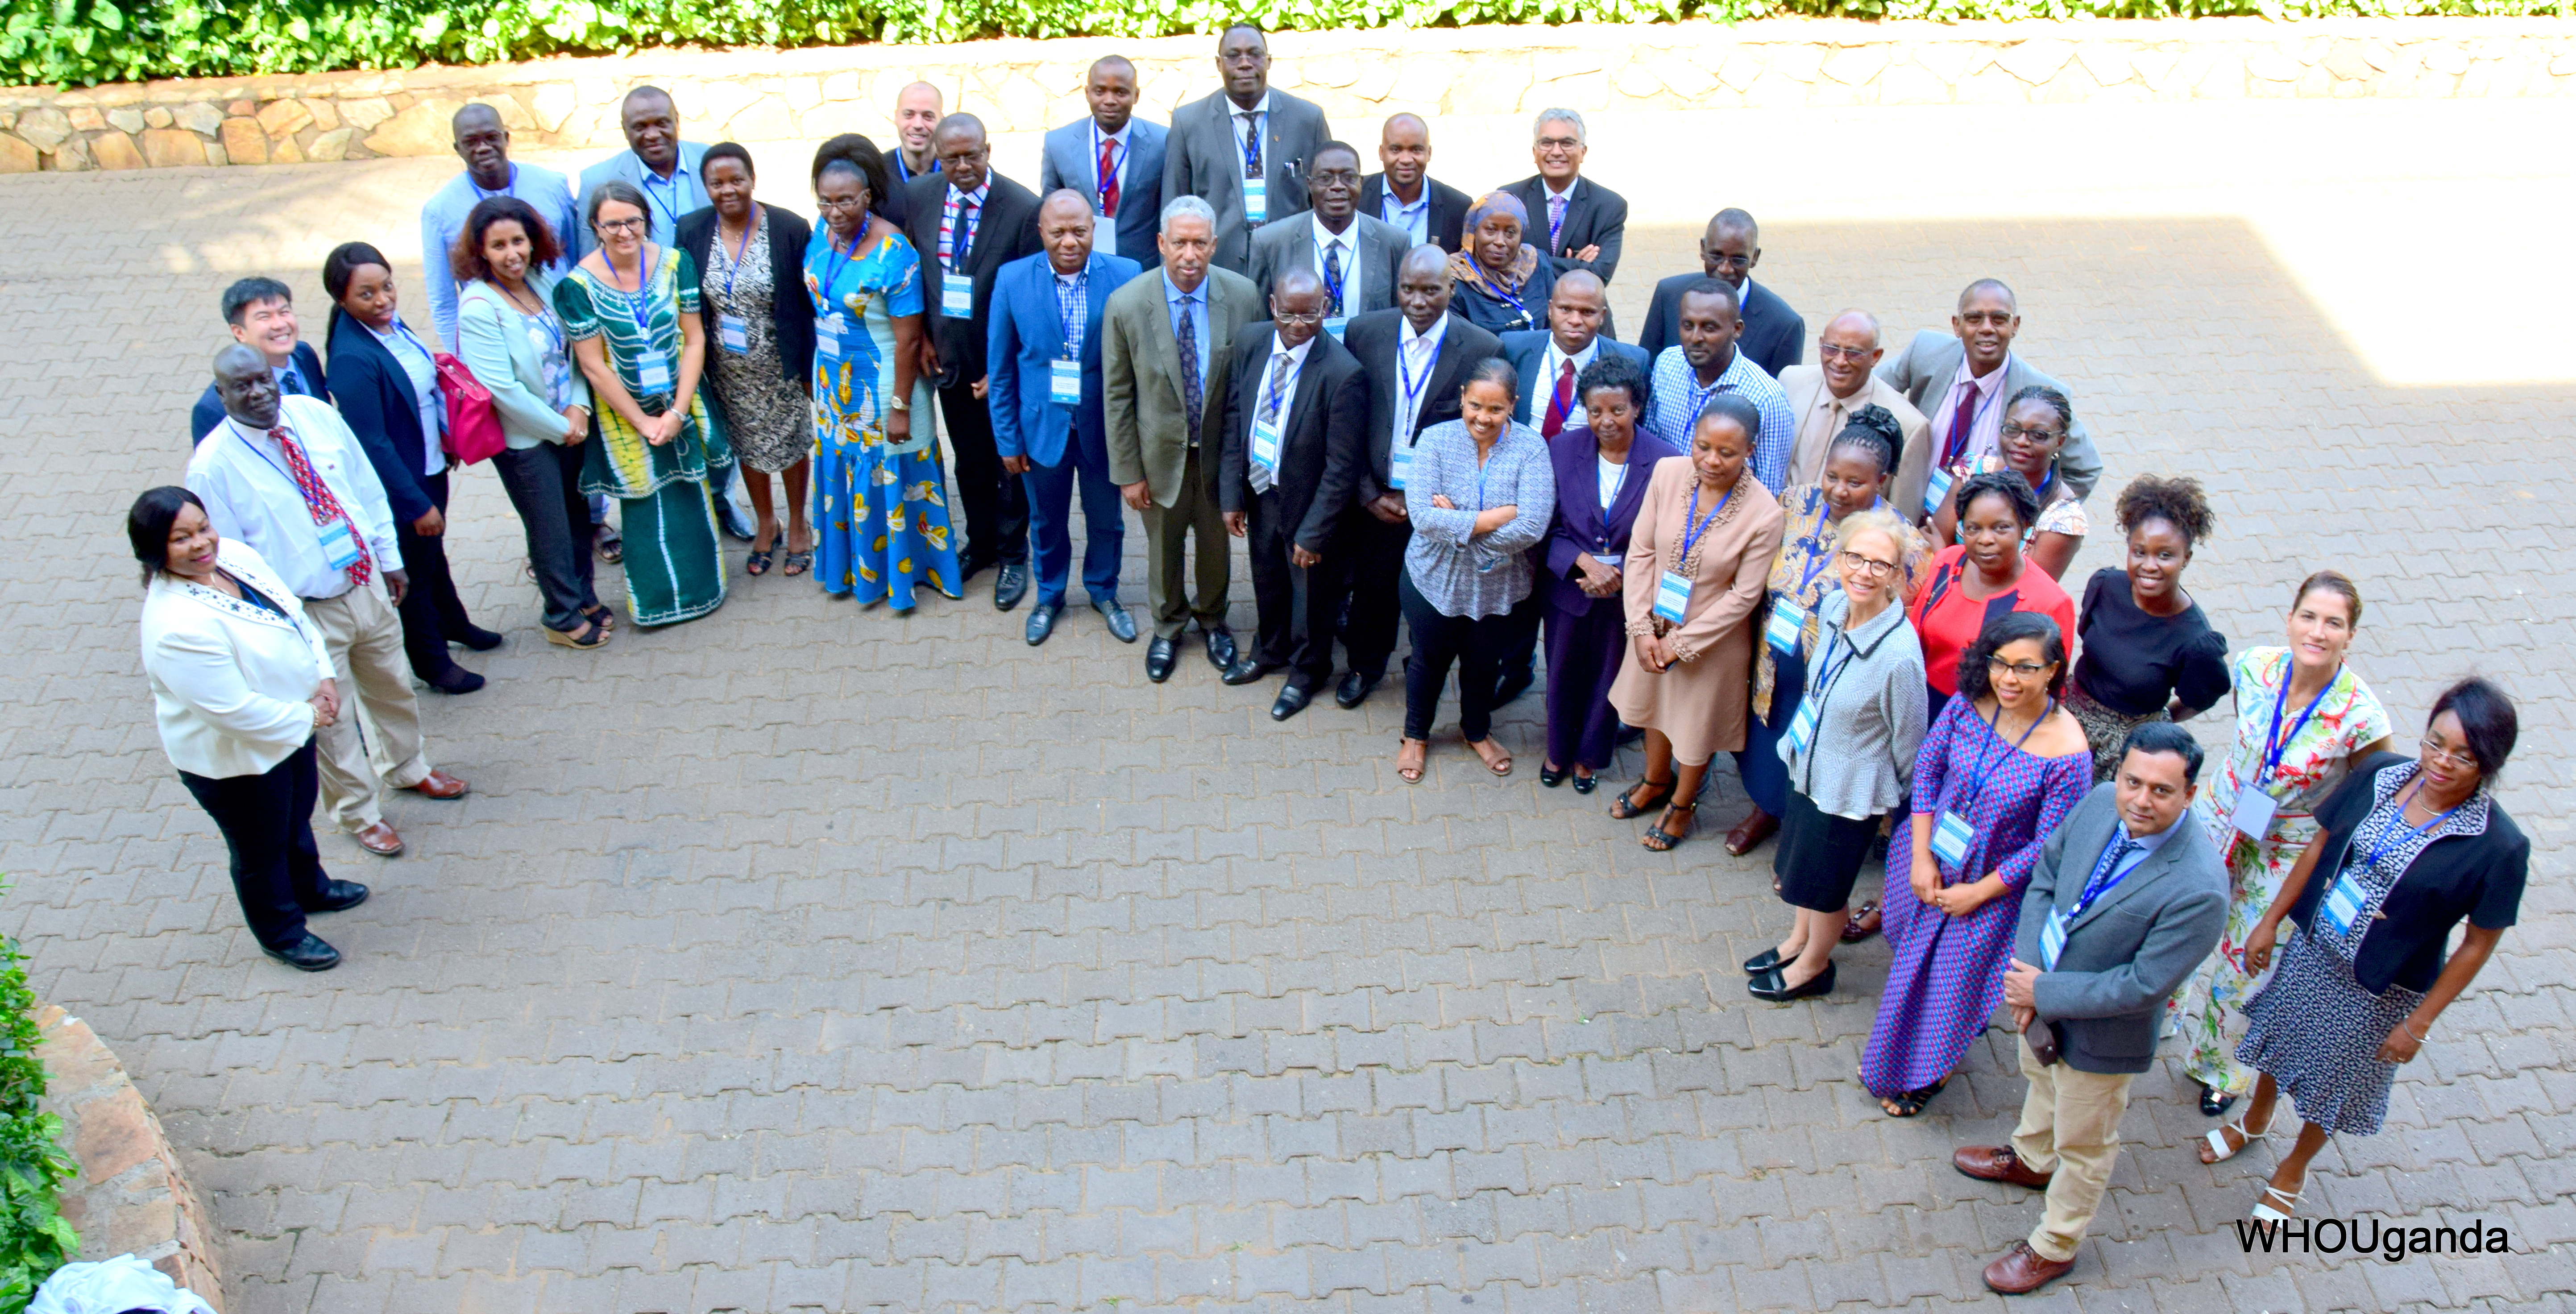 A workshop was convened to address the urgent need for countries to strengthen regional and national capacity in the areas of Infection Prevention and Control (IPC) given the ever increasing number of infectious disease outbreaks in many parts of the world.